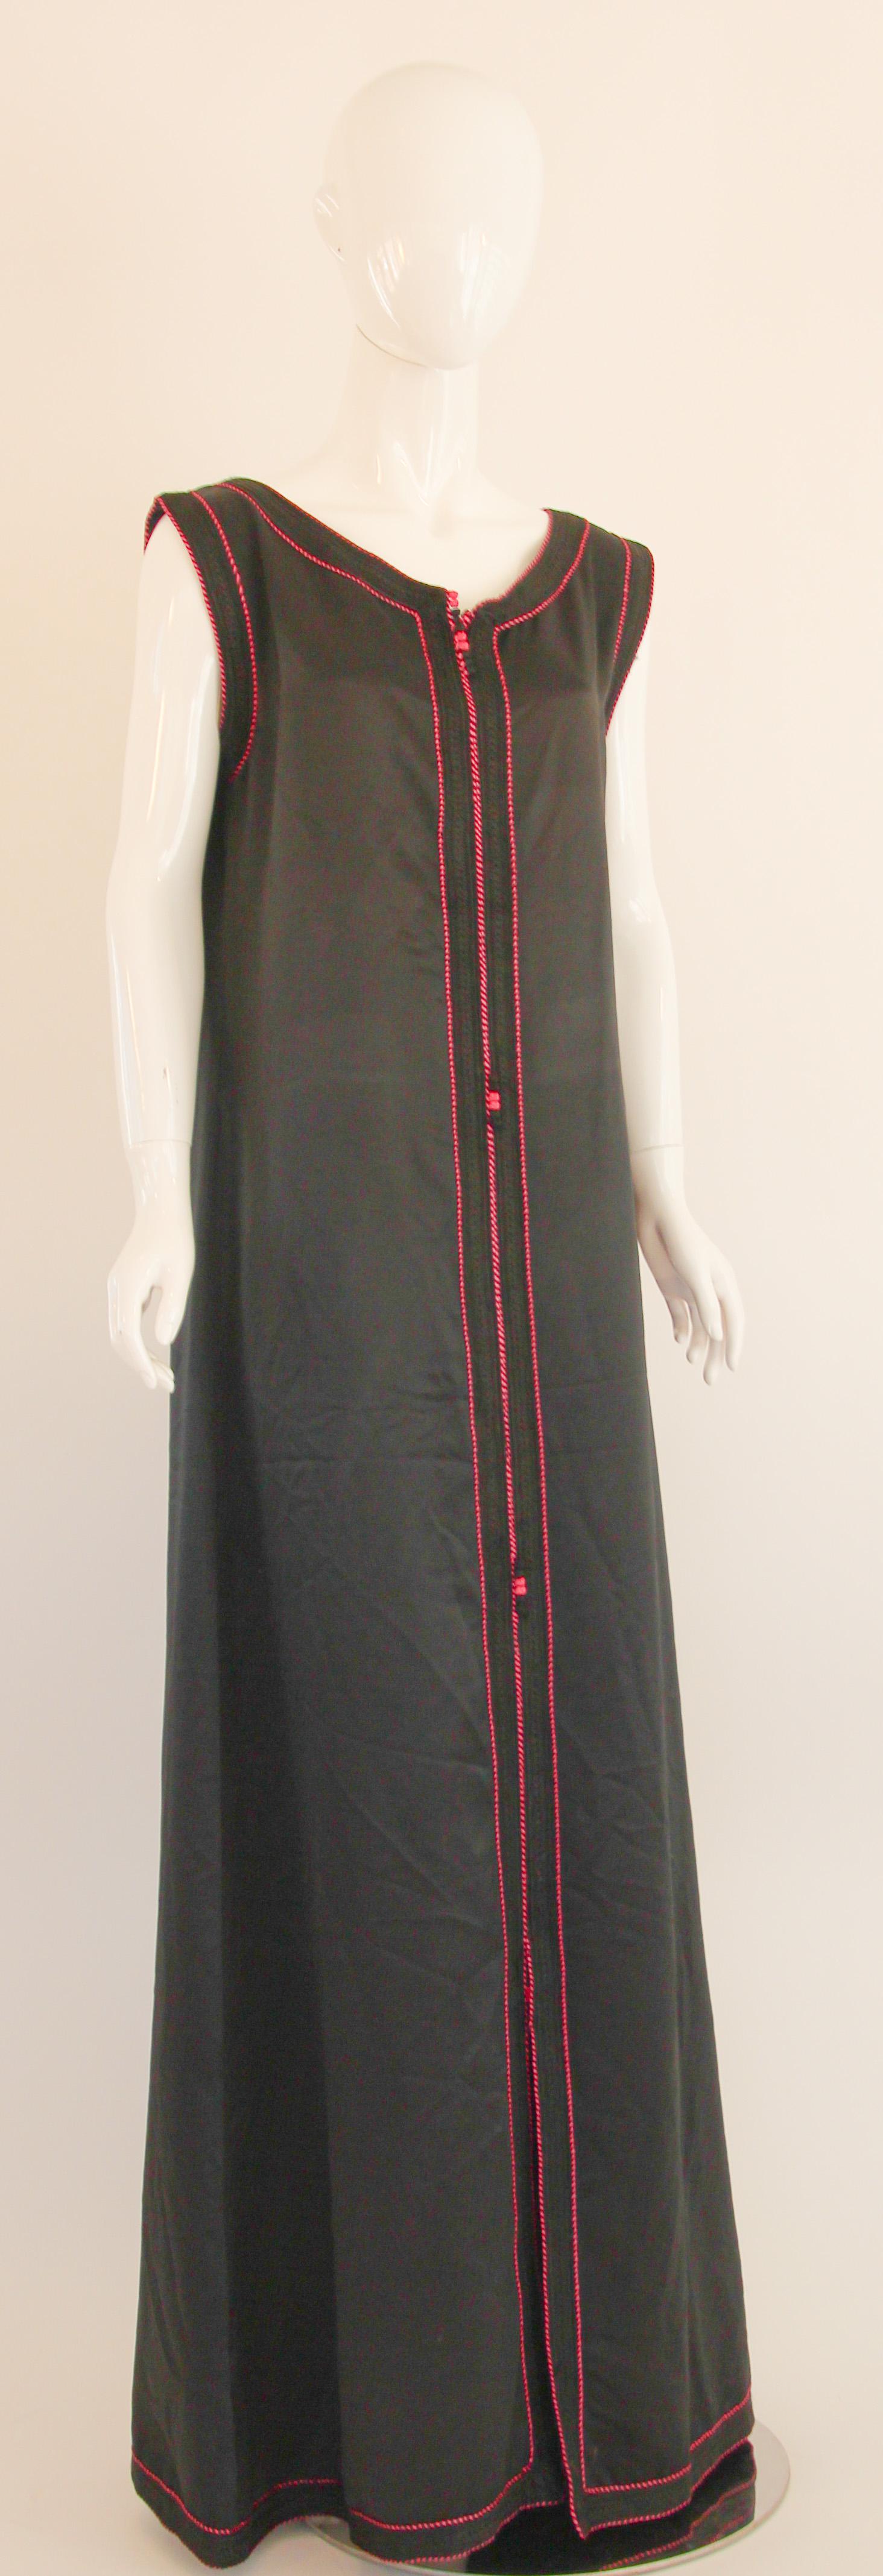 Amazing vintage handmade sleeveless caftan, black color with pink rim threads. 
Circa 1980's.
The kaftan is embroidered and embellished entirely by hand.
 This authentic caftan has been hand-sewn with a trim embroidered with hot pink and black